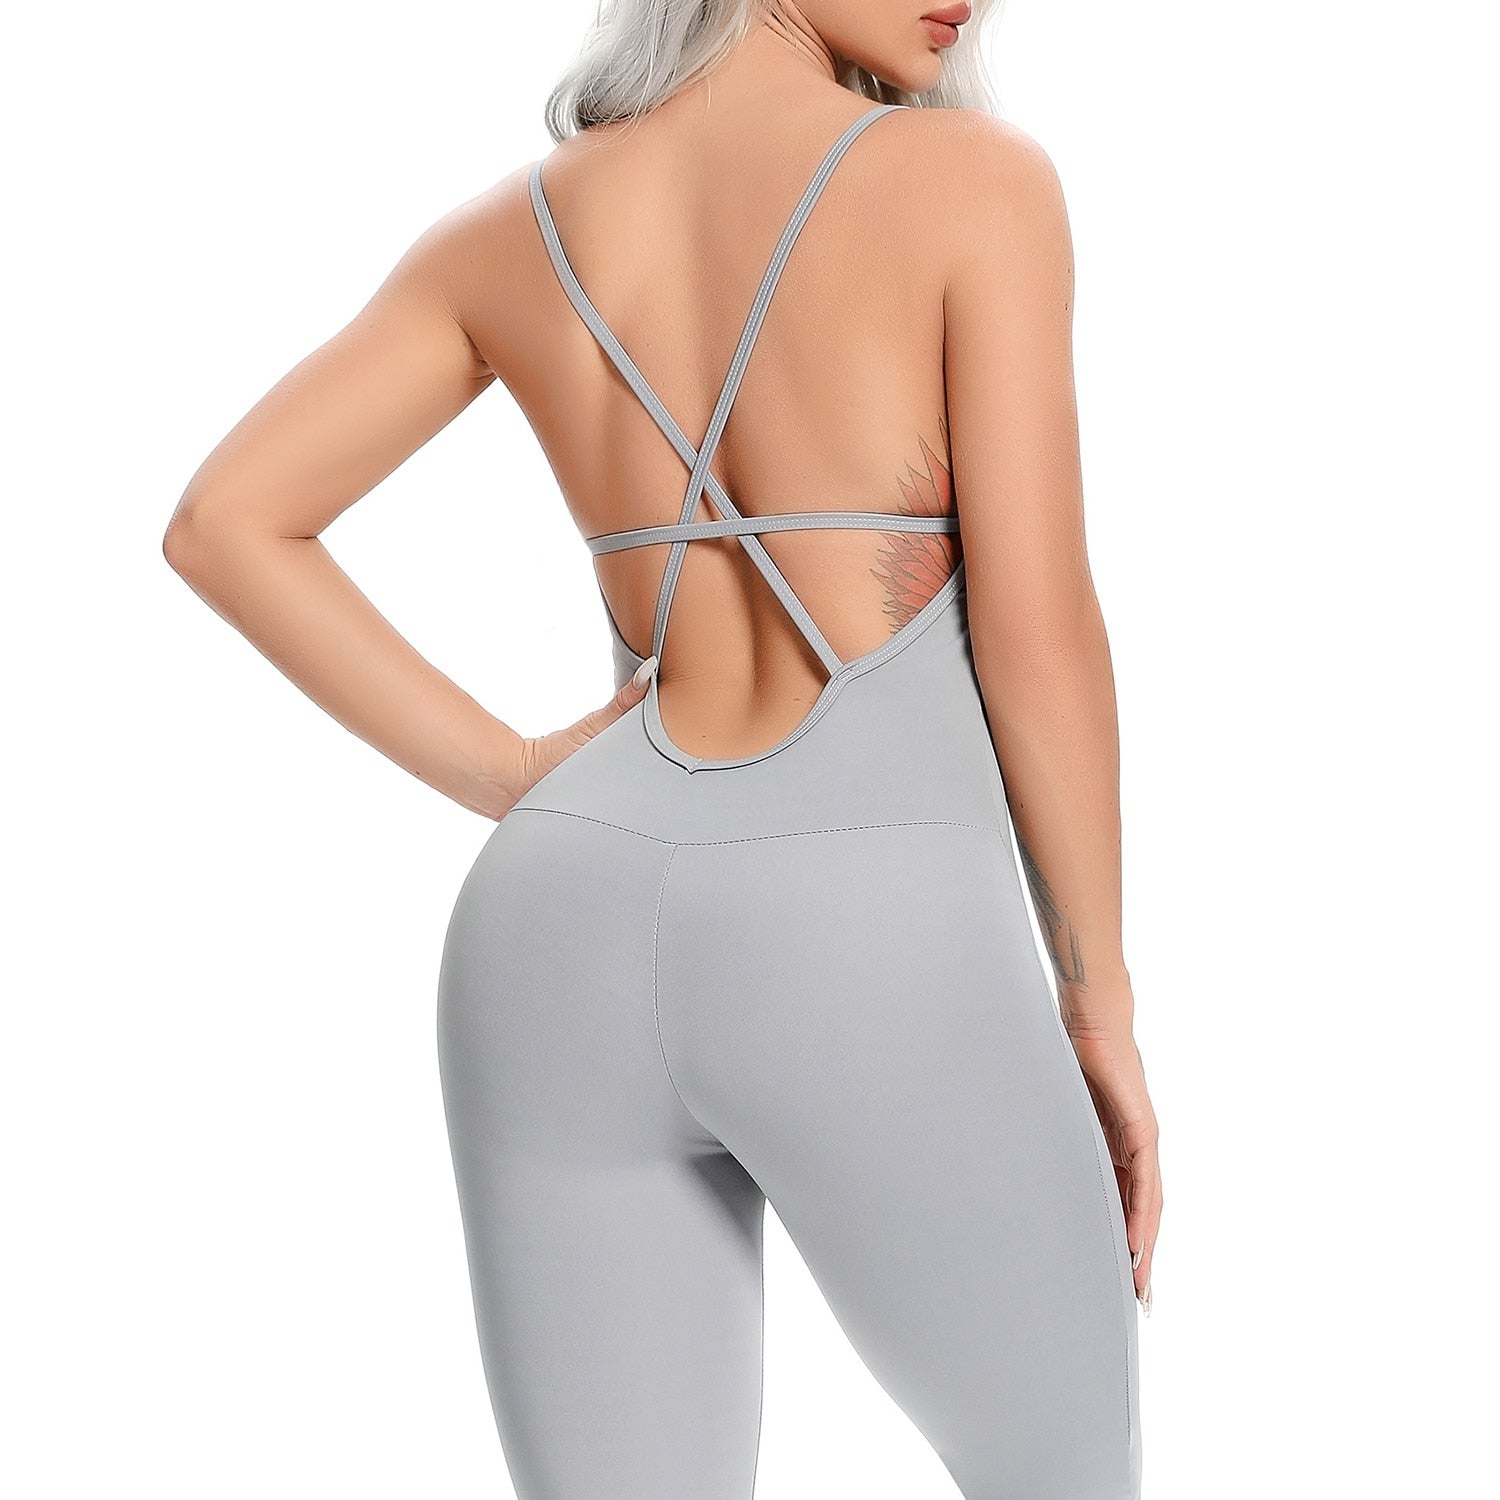 Fitness Yoga Set Women Sexy Jumpsuit Sleeveless Tracksuit One Piece Sports Clothing Backless Workout Sportswear Gym Leggings voguable